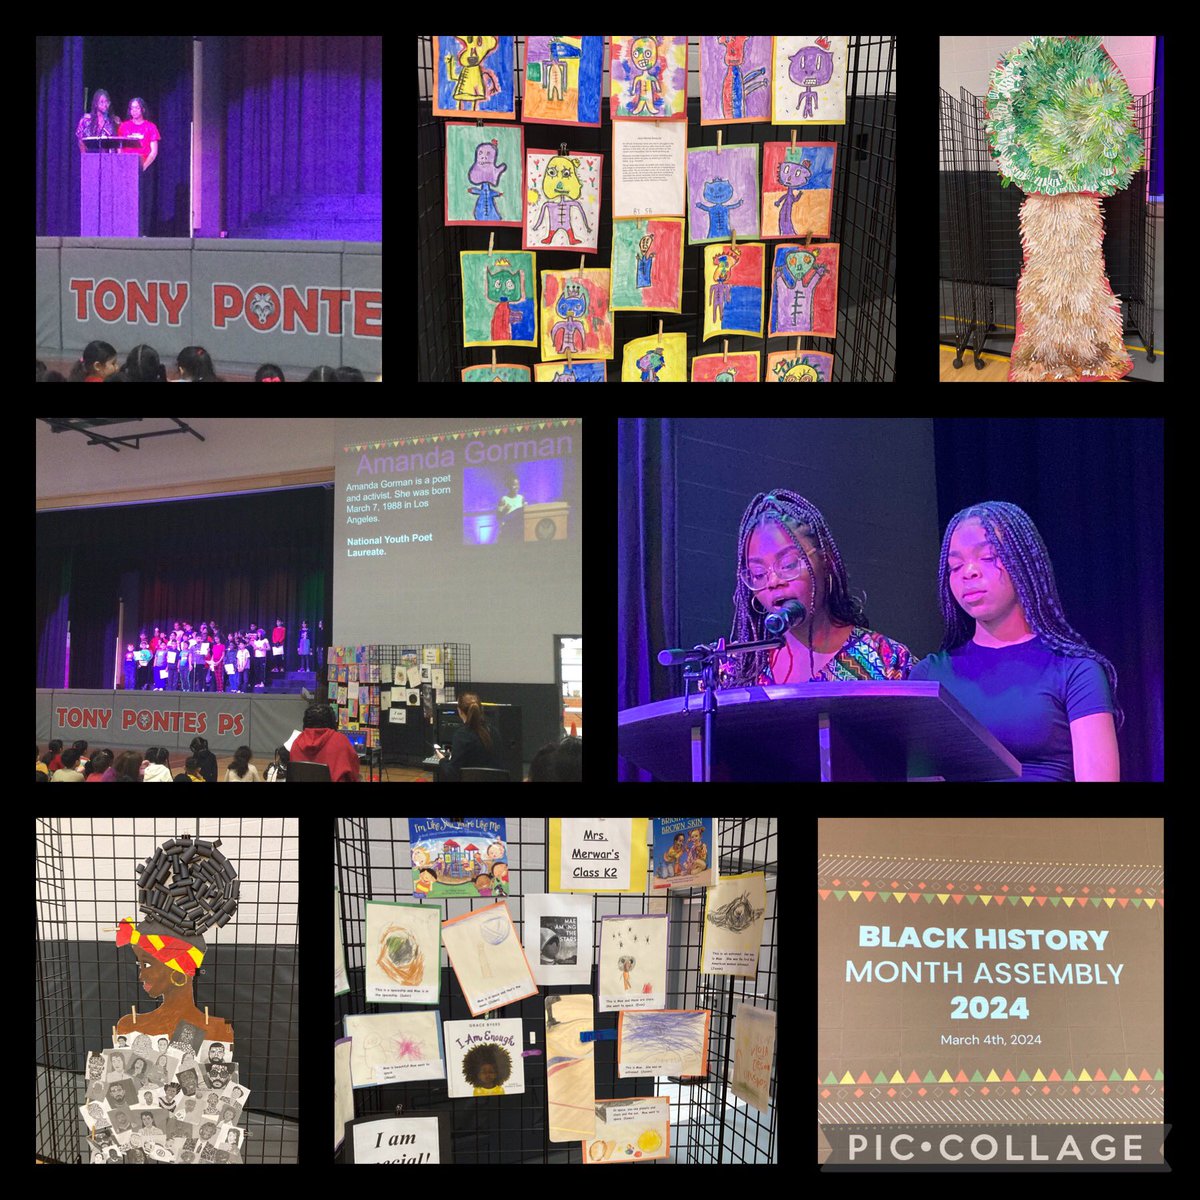 “Today we will celebrate the joy, determination, resilience, brilliance and liberation of Black individuals in Canada and globally”. #BlackHistoryMonth @PeelSchools